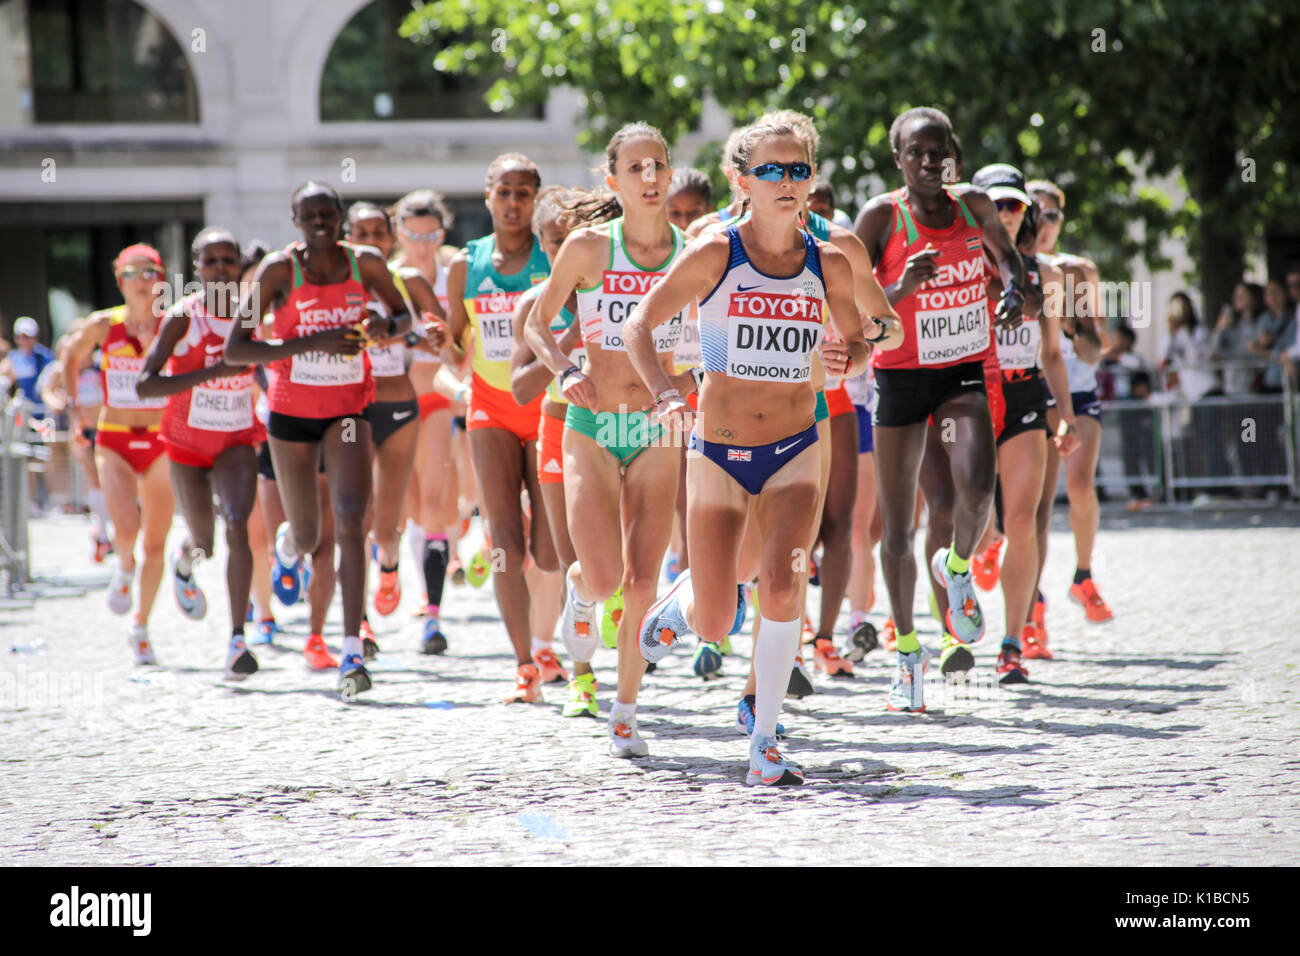 6 August 2017, London: Alyson Dixon (GBR) leads the race early in the IAAF World Championships Women's Marathon 2017 Stock Photo